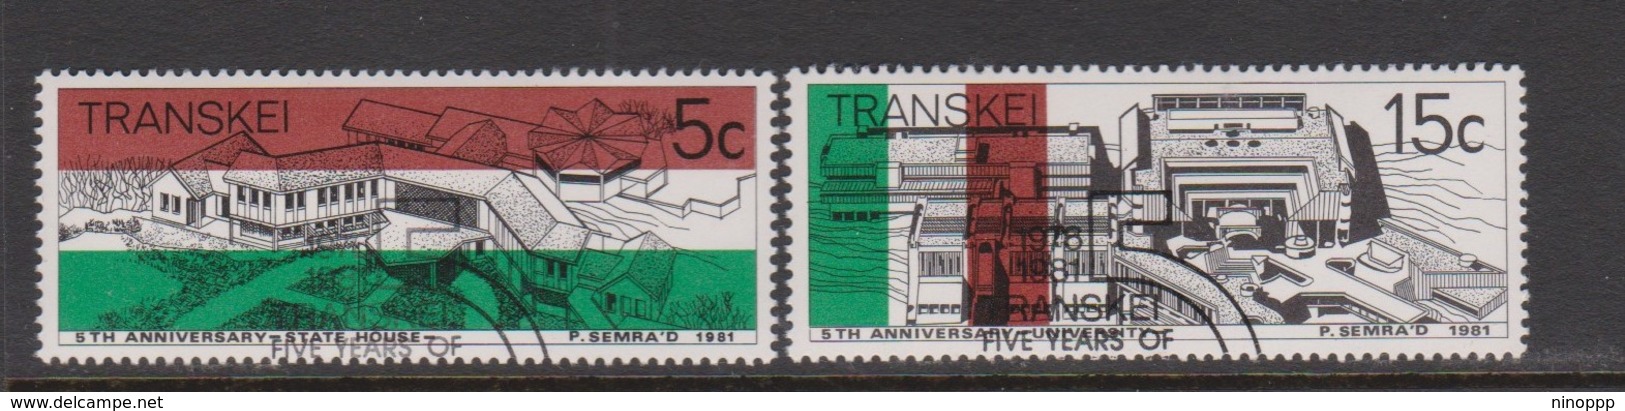 South Africa-Transkei SG 97-98 1981 5th Anniversary Independence, Used - Transkei